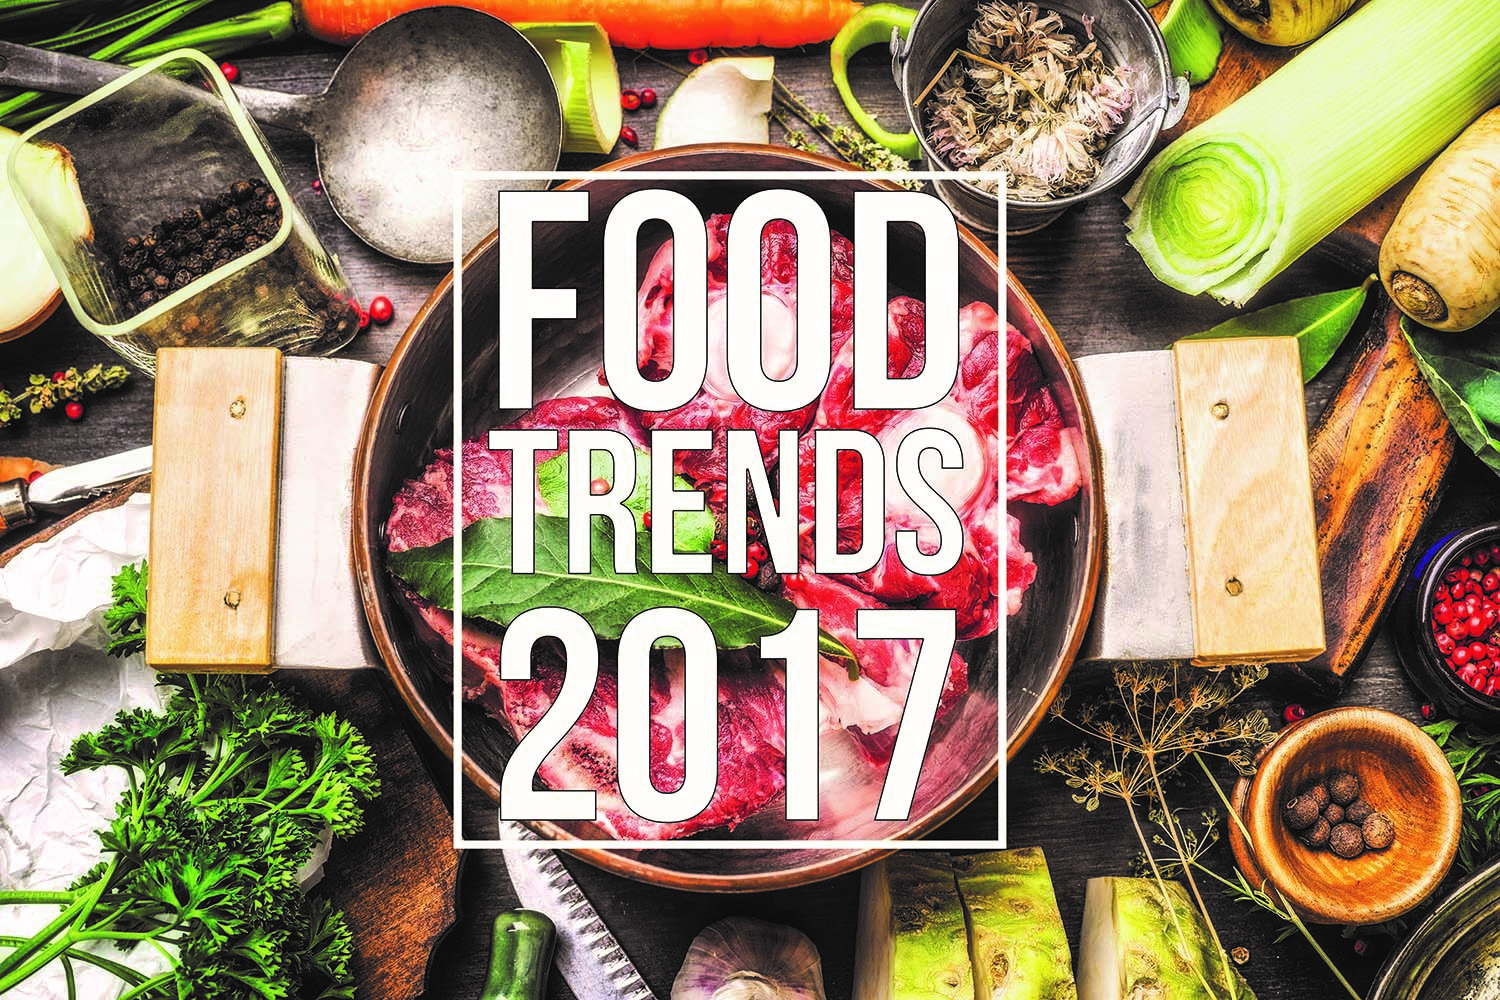 OSU's Robert M. Kerr Food & Agricultural Products Center Picks the Hottest Food Trends for 2017